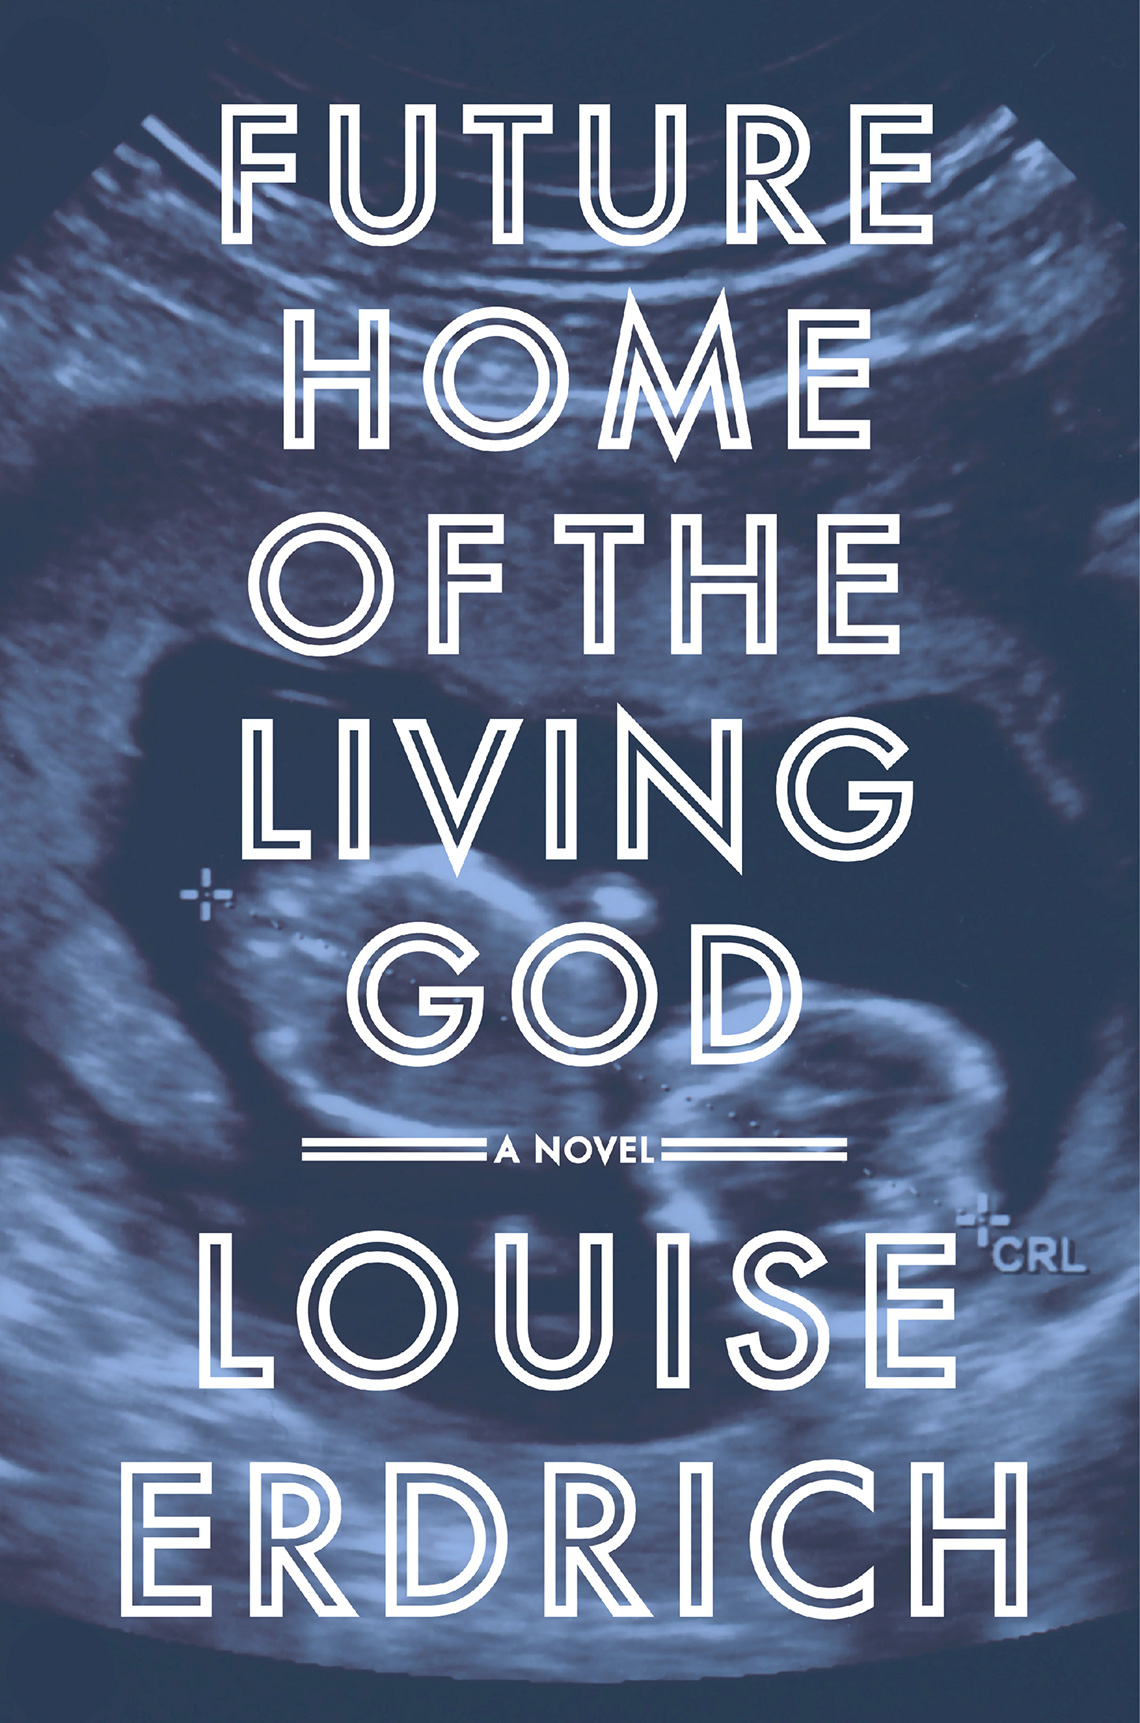 'Future Home of the Living God' by Louise Erdrich   